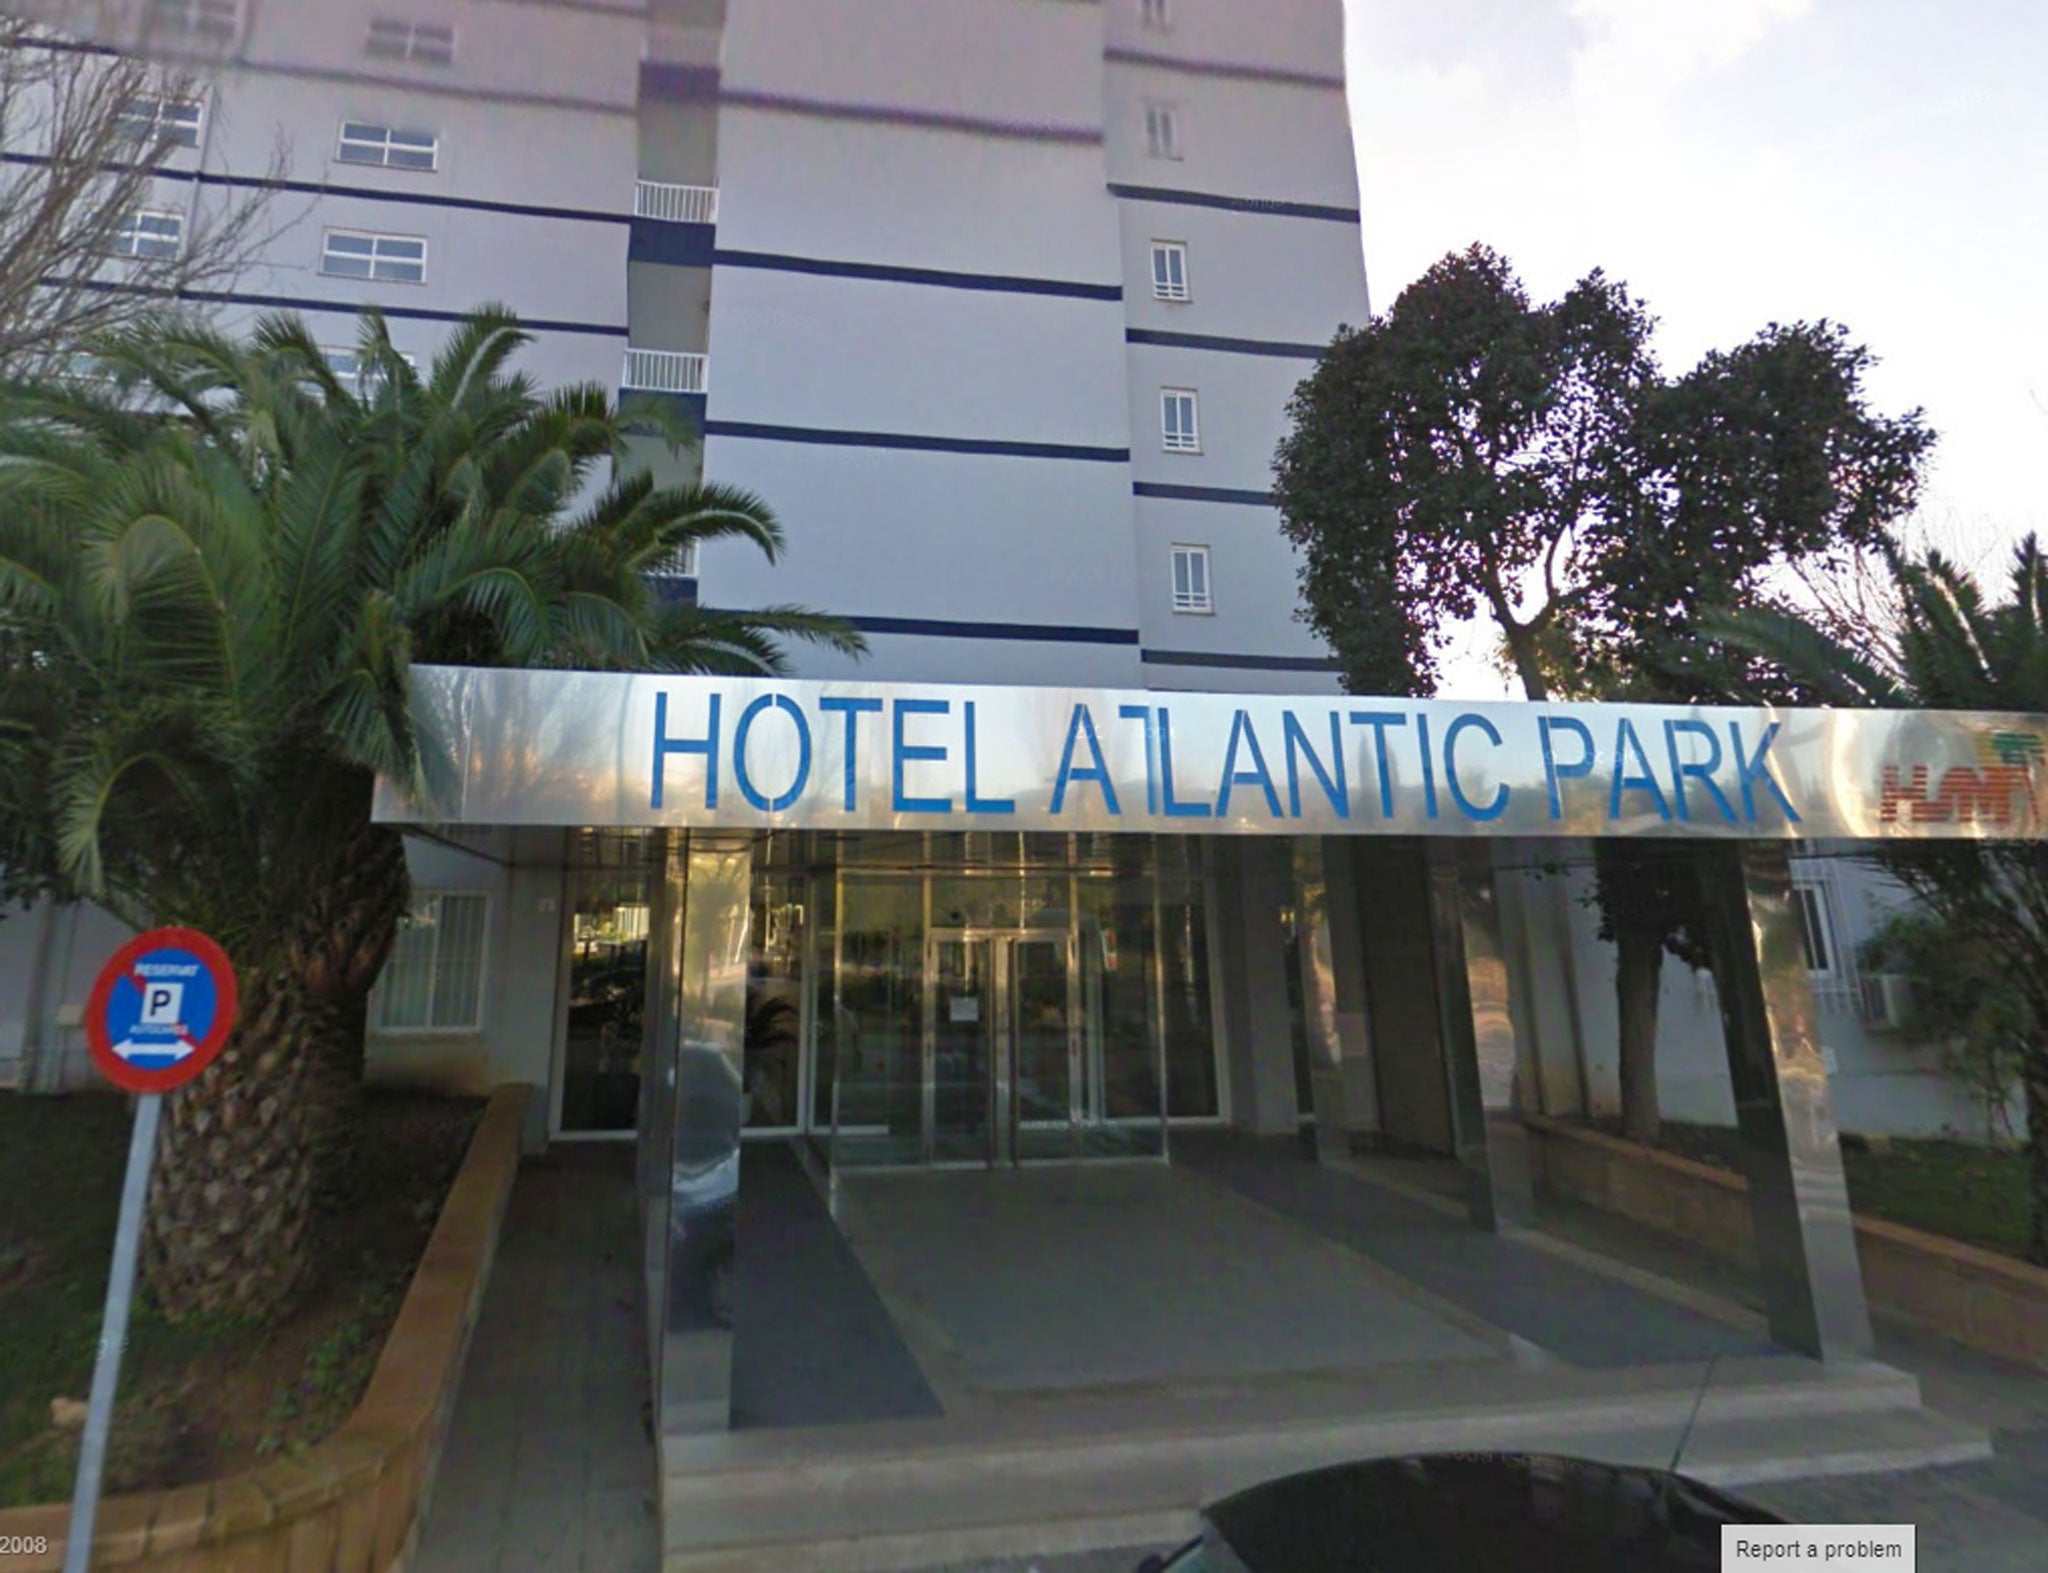 The Atlantic Park hotel in Magaluf, where the incident reportedly happened